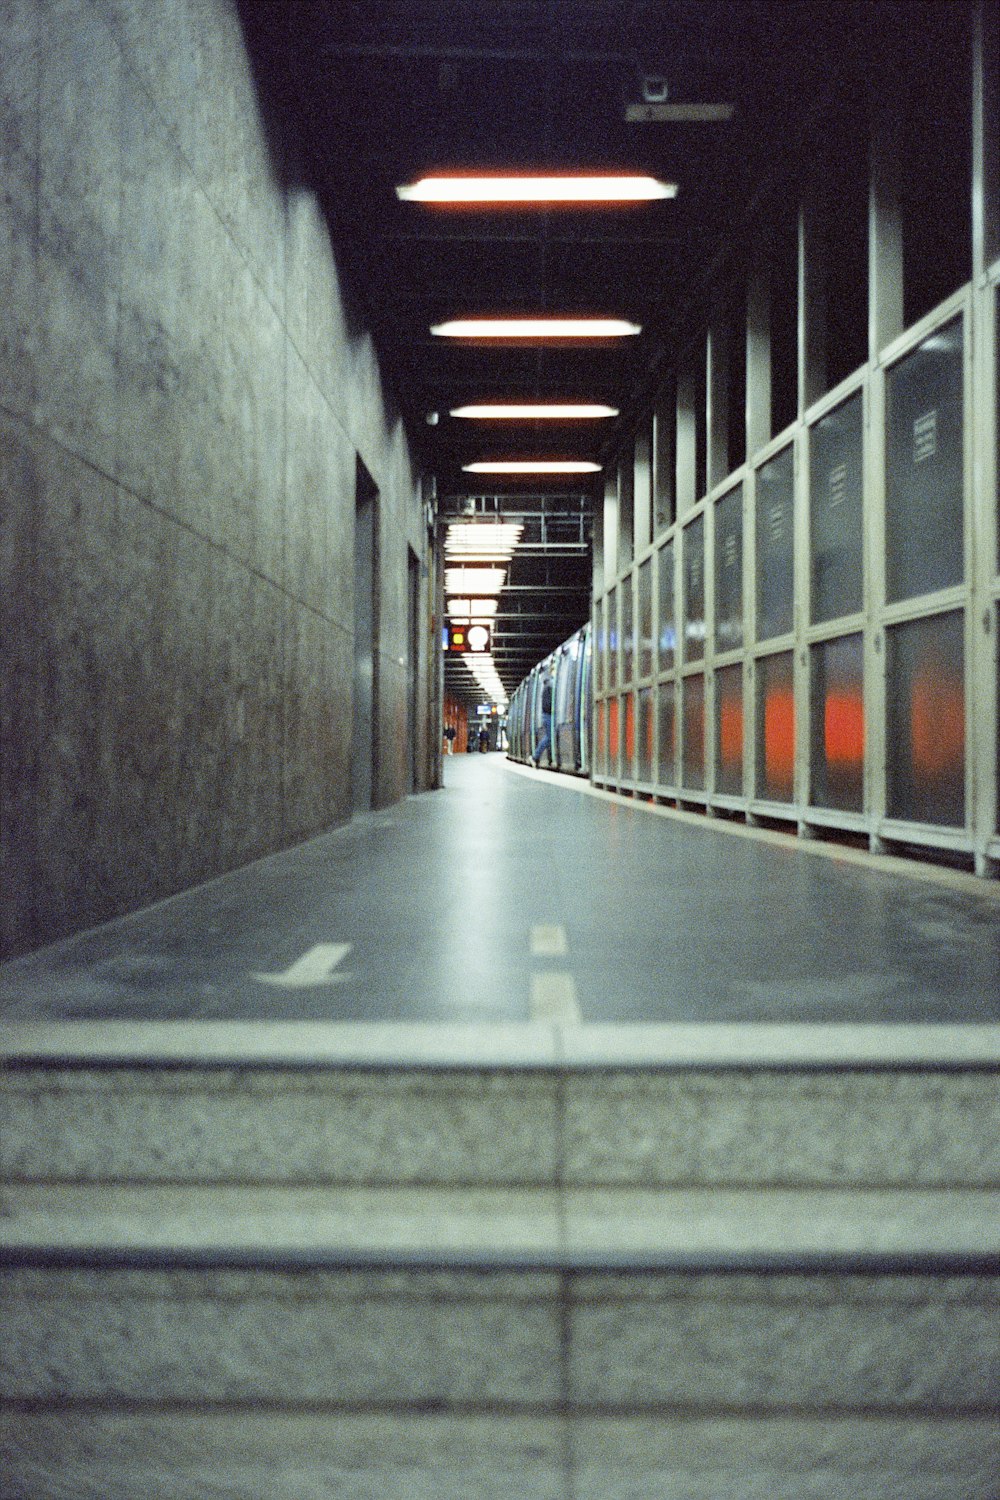 a long hallway with a concrete floor and walls